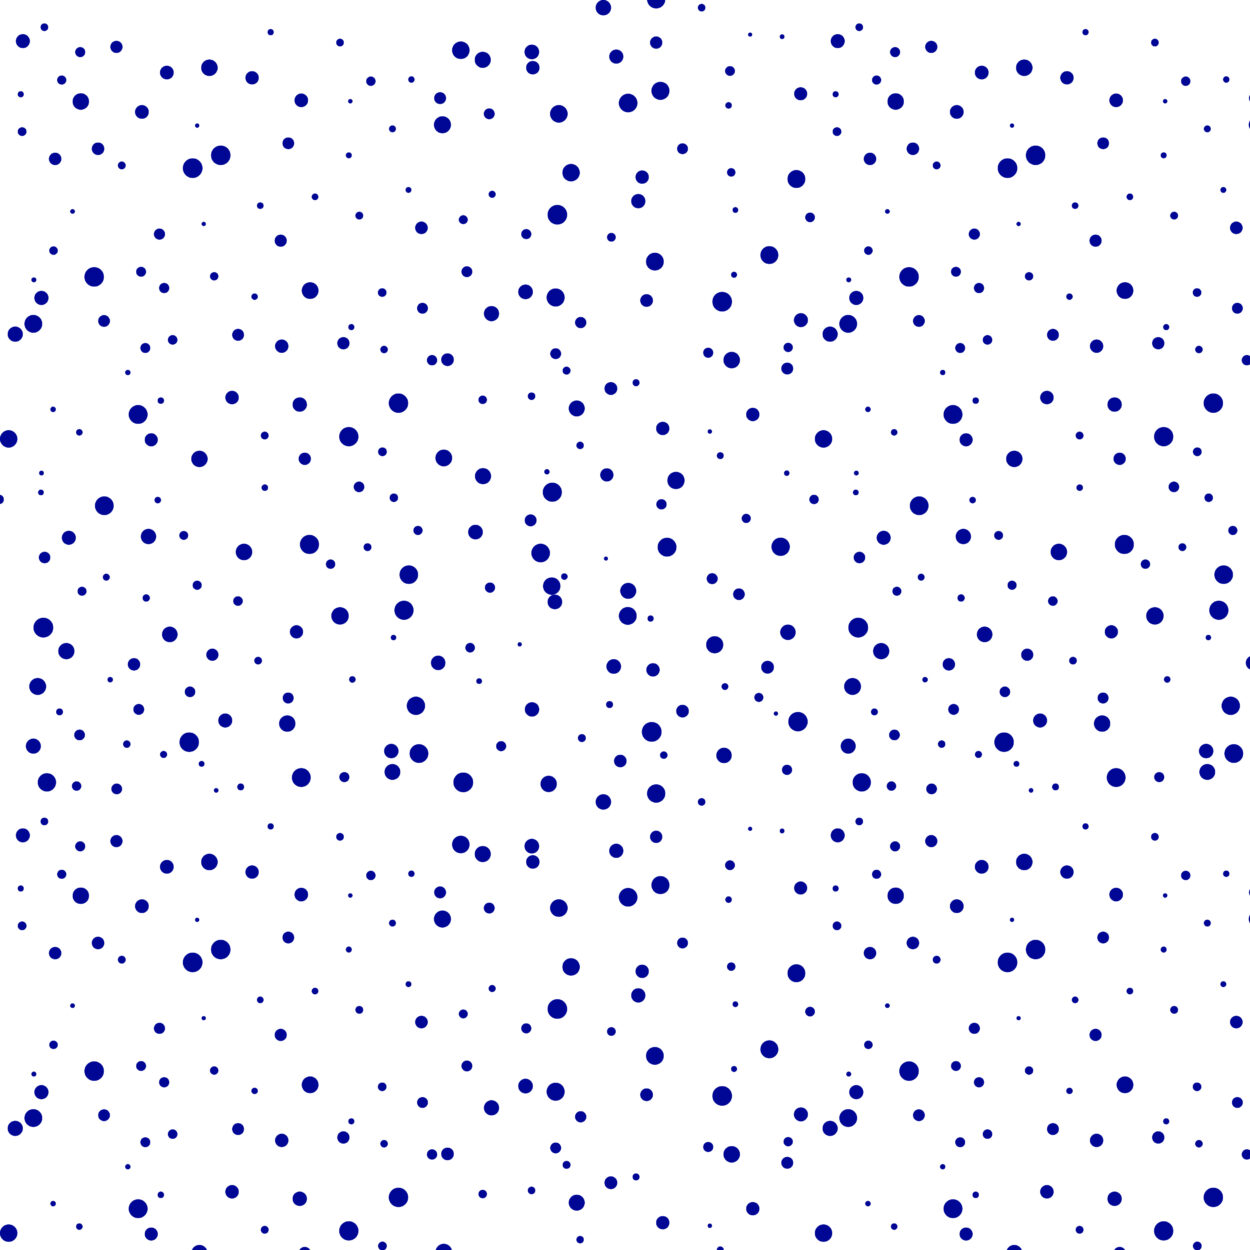 Multiple different sized blue dots on a white background